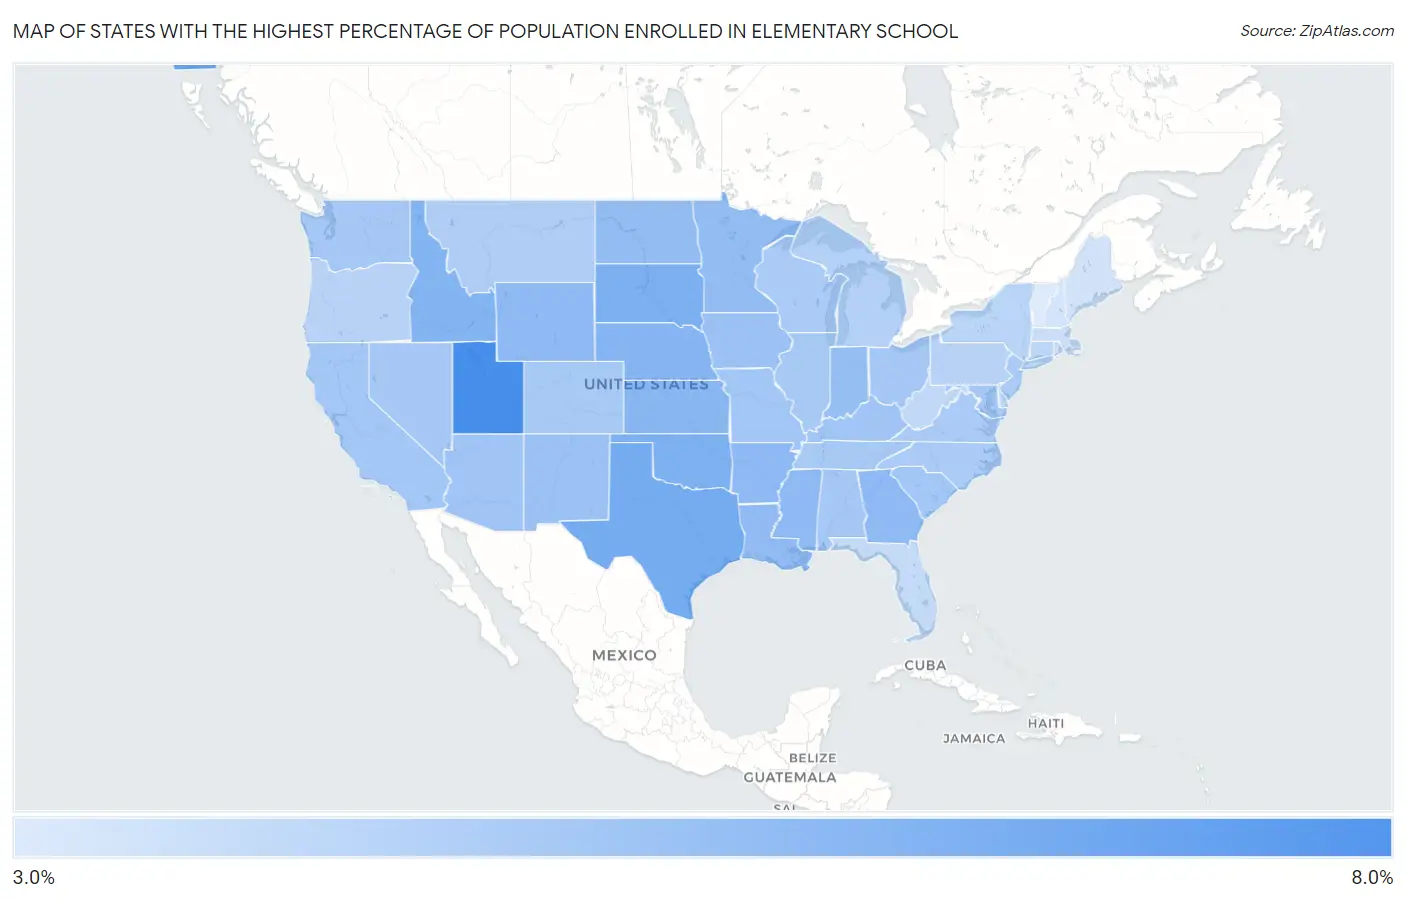 States with the Highest Percentage of Population Enrolled in Elementary School in the United States Map